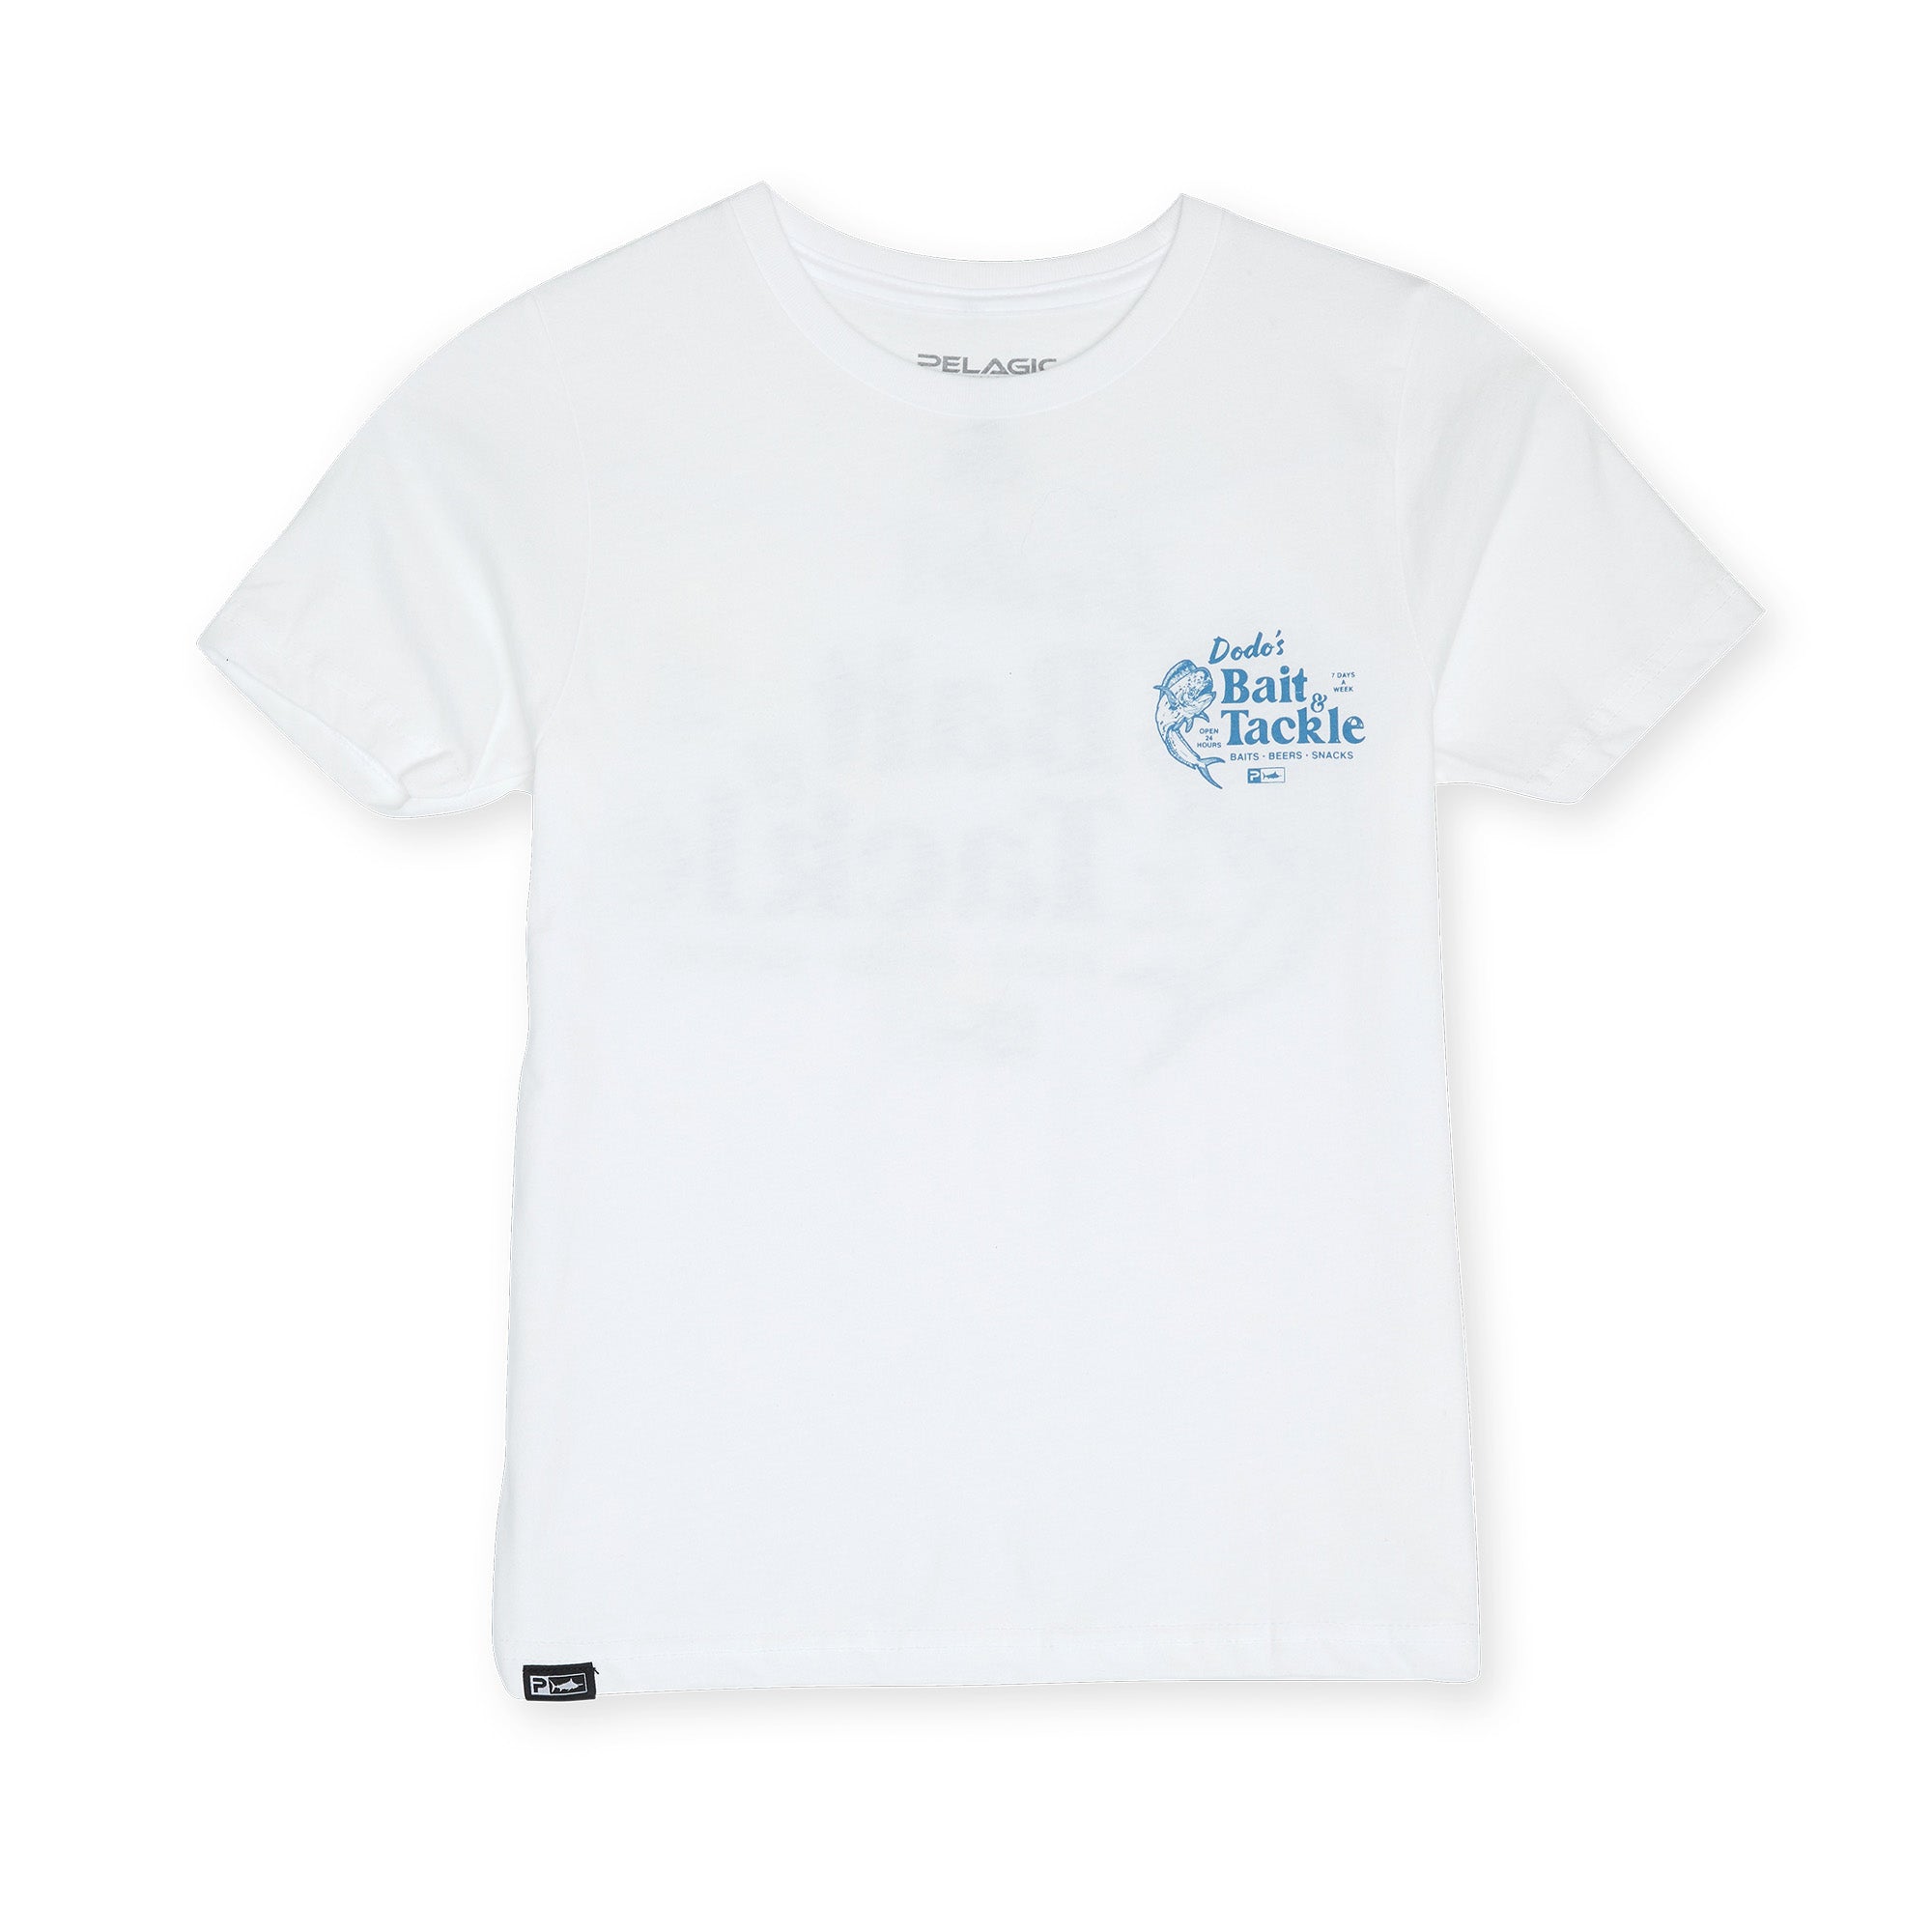 Youth Twin Beeks Youth T-Shirt